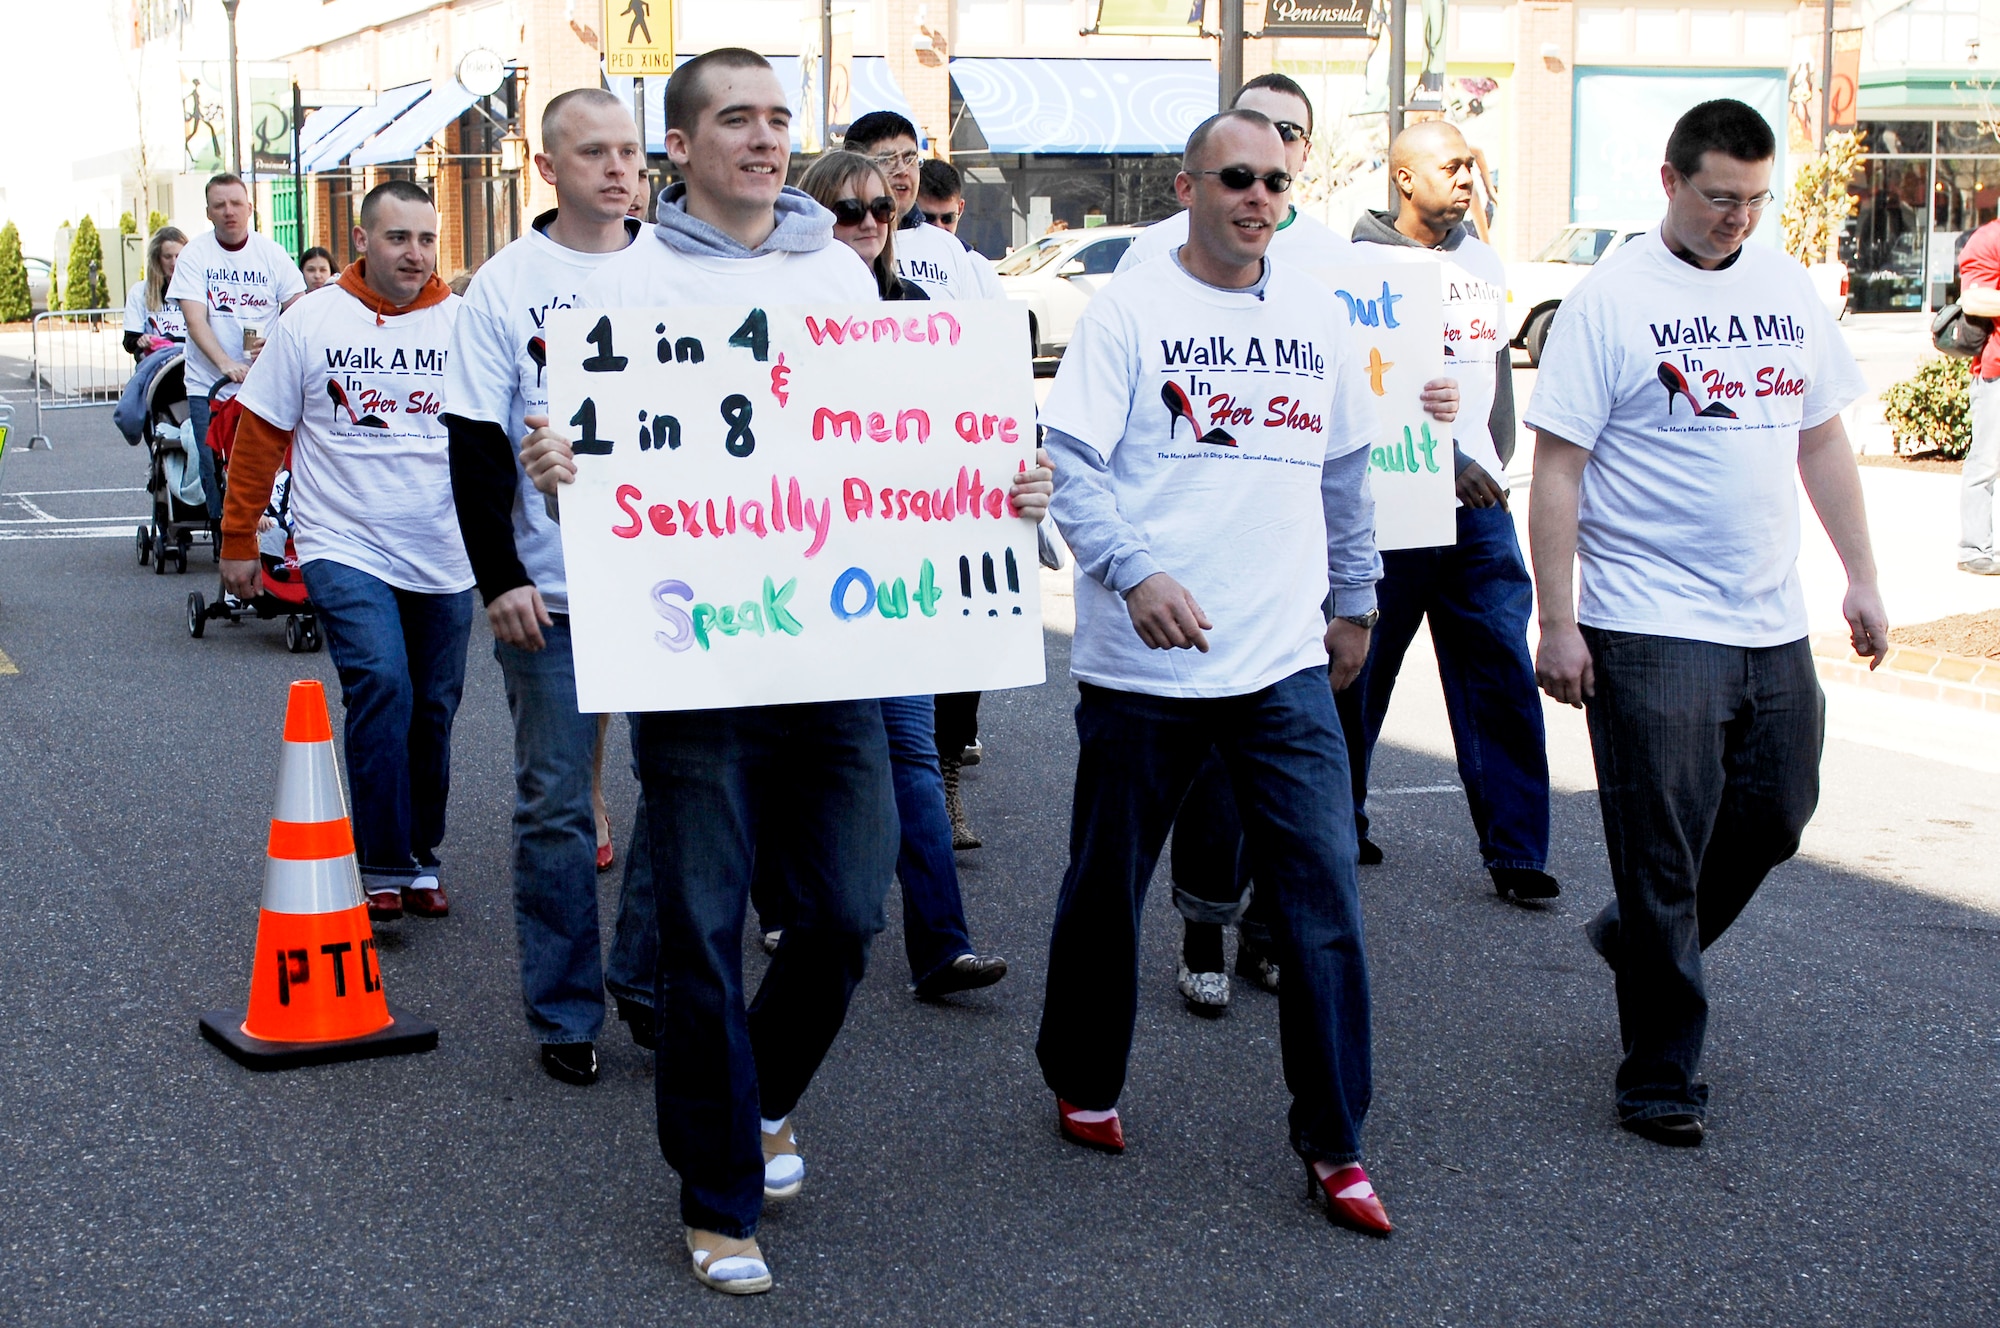 Eleven men assigned to the 633d Communications Squadron participate in Walk a Mile in Her Shoes to show their support for the fight to end sexual violence in Hampton, Va., April 2, 2011. The march is a “fun way for men to show their support in the fight to end sexual violence.” (U.S Air Force photo by Airman 1st Class Kayla Newman/Released)